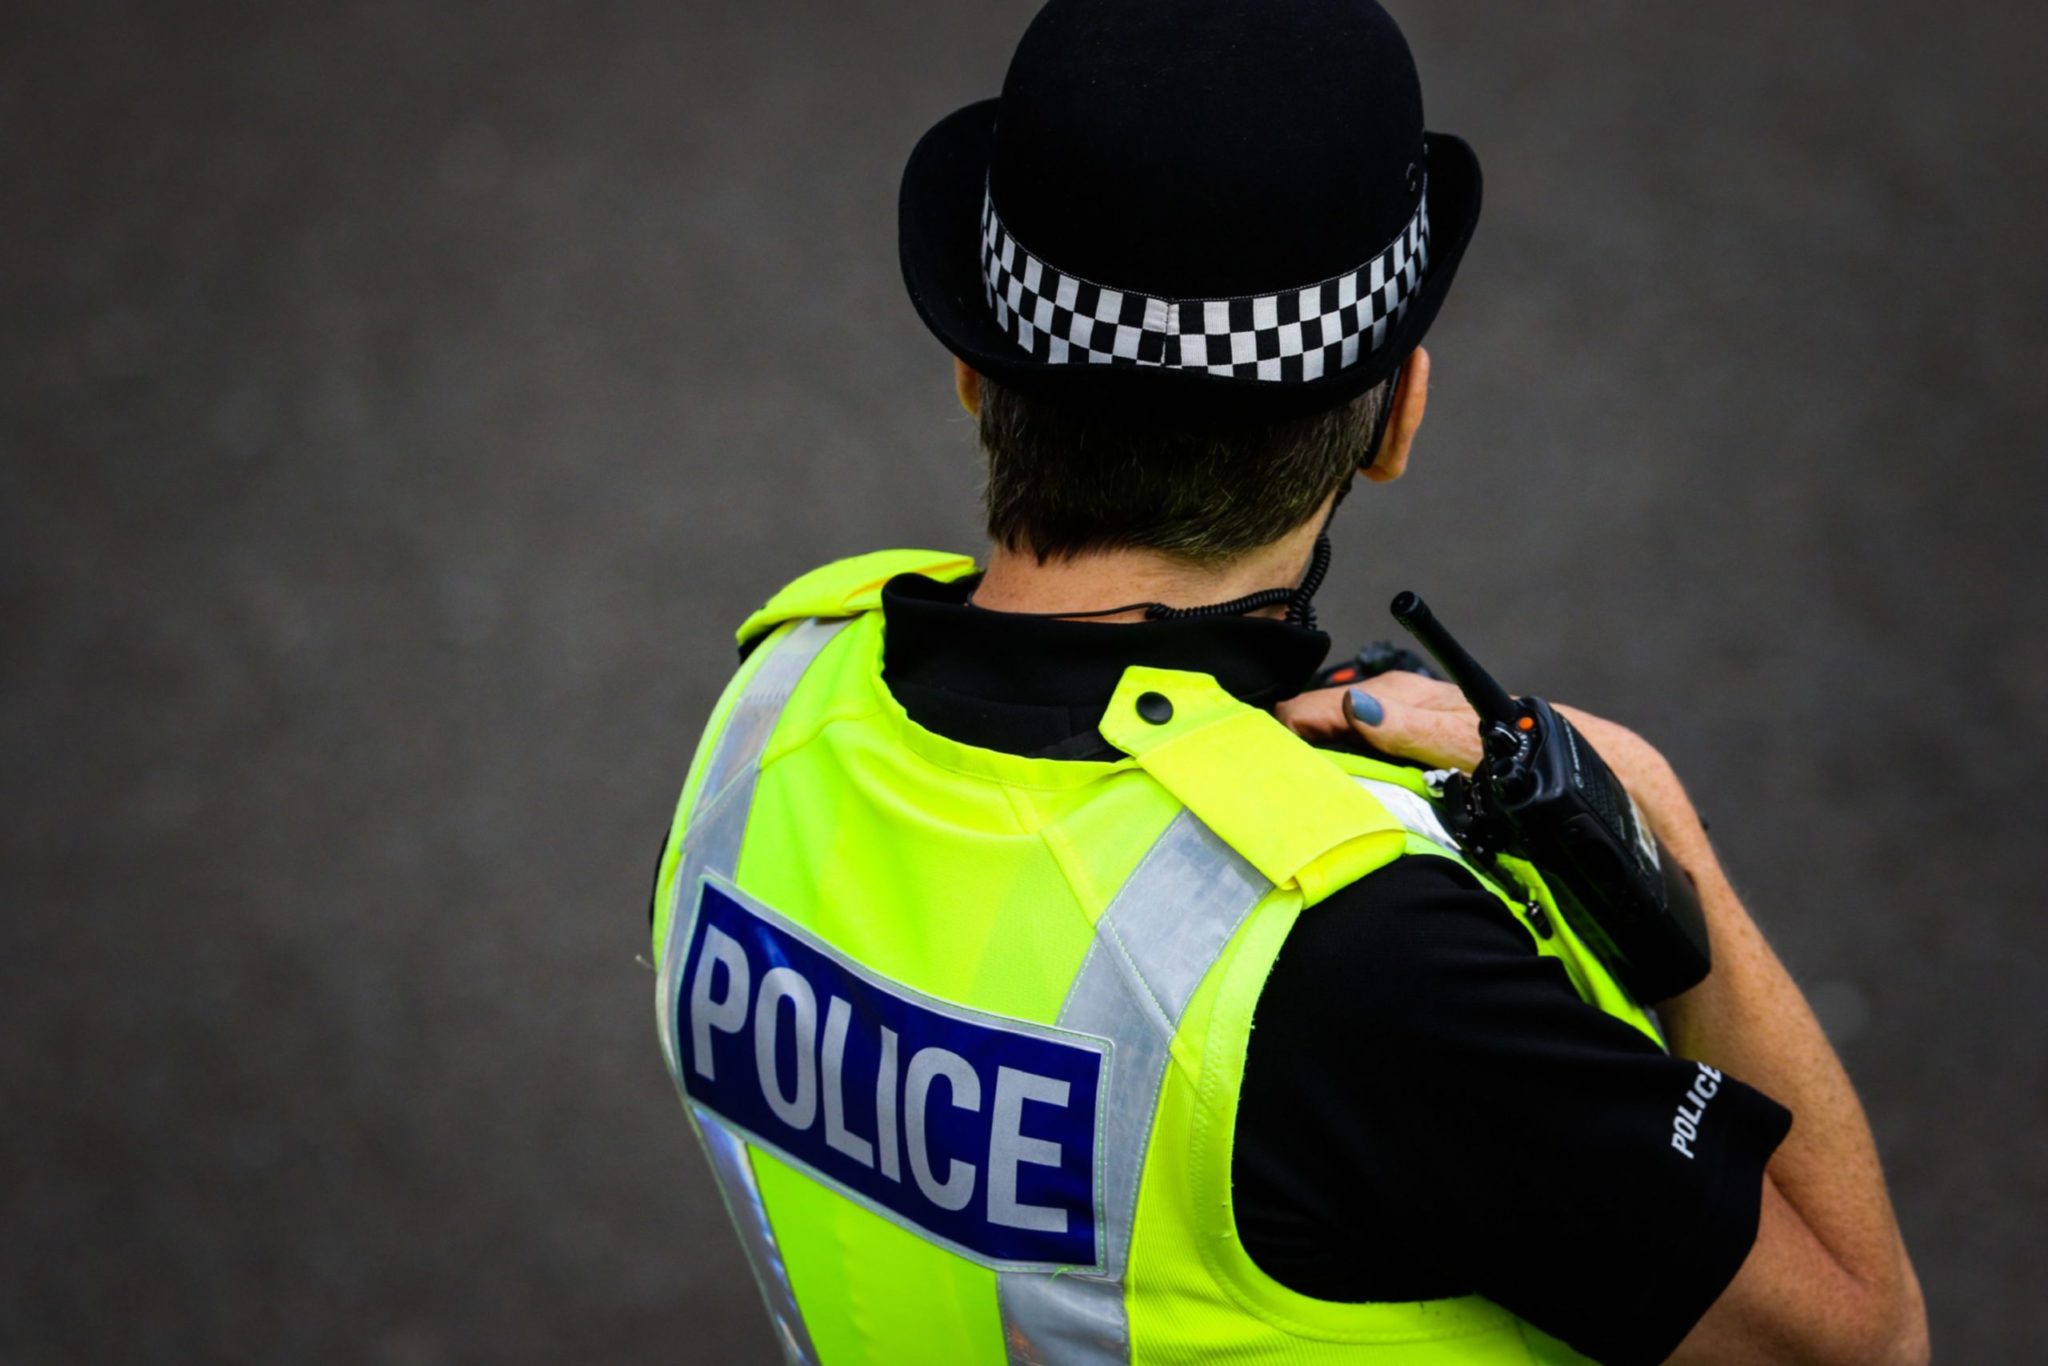 Police launch investigation into break-in at Crieff primary school